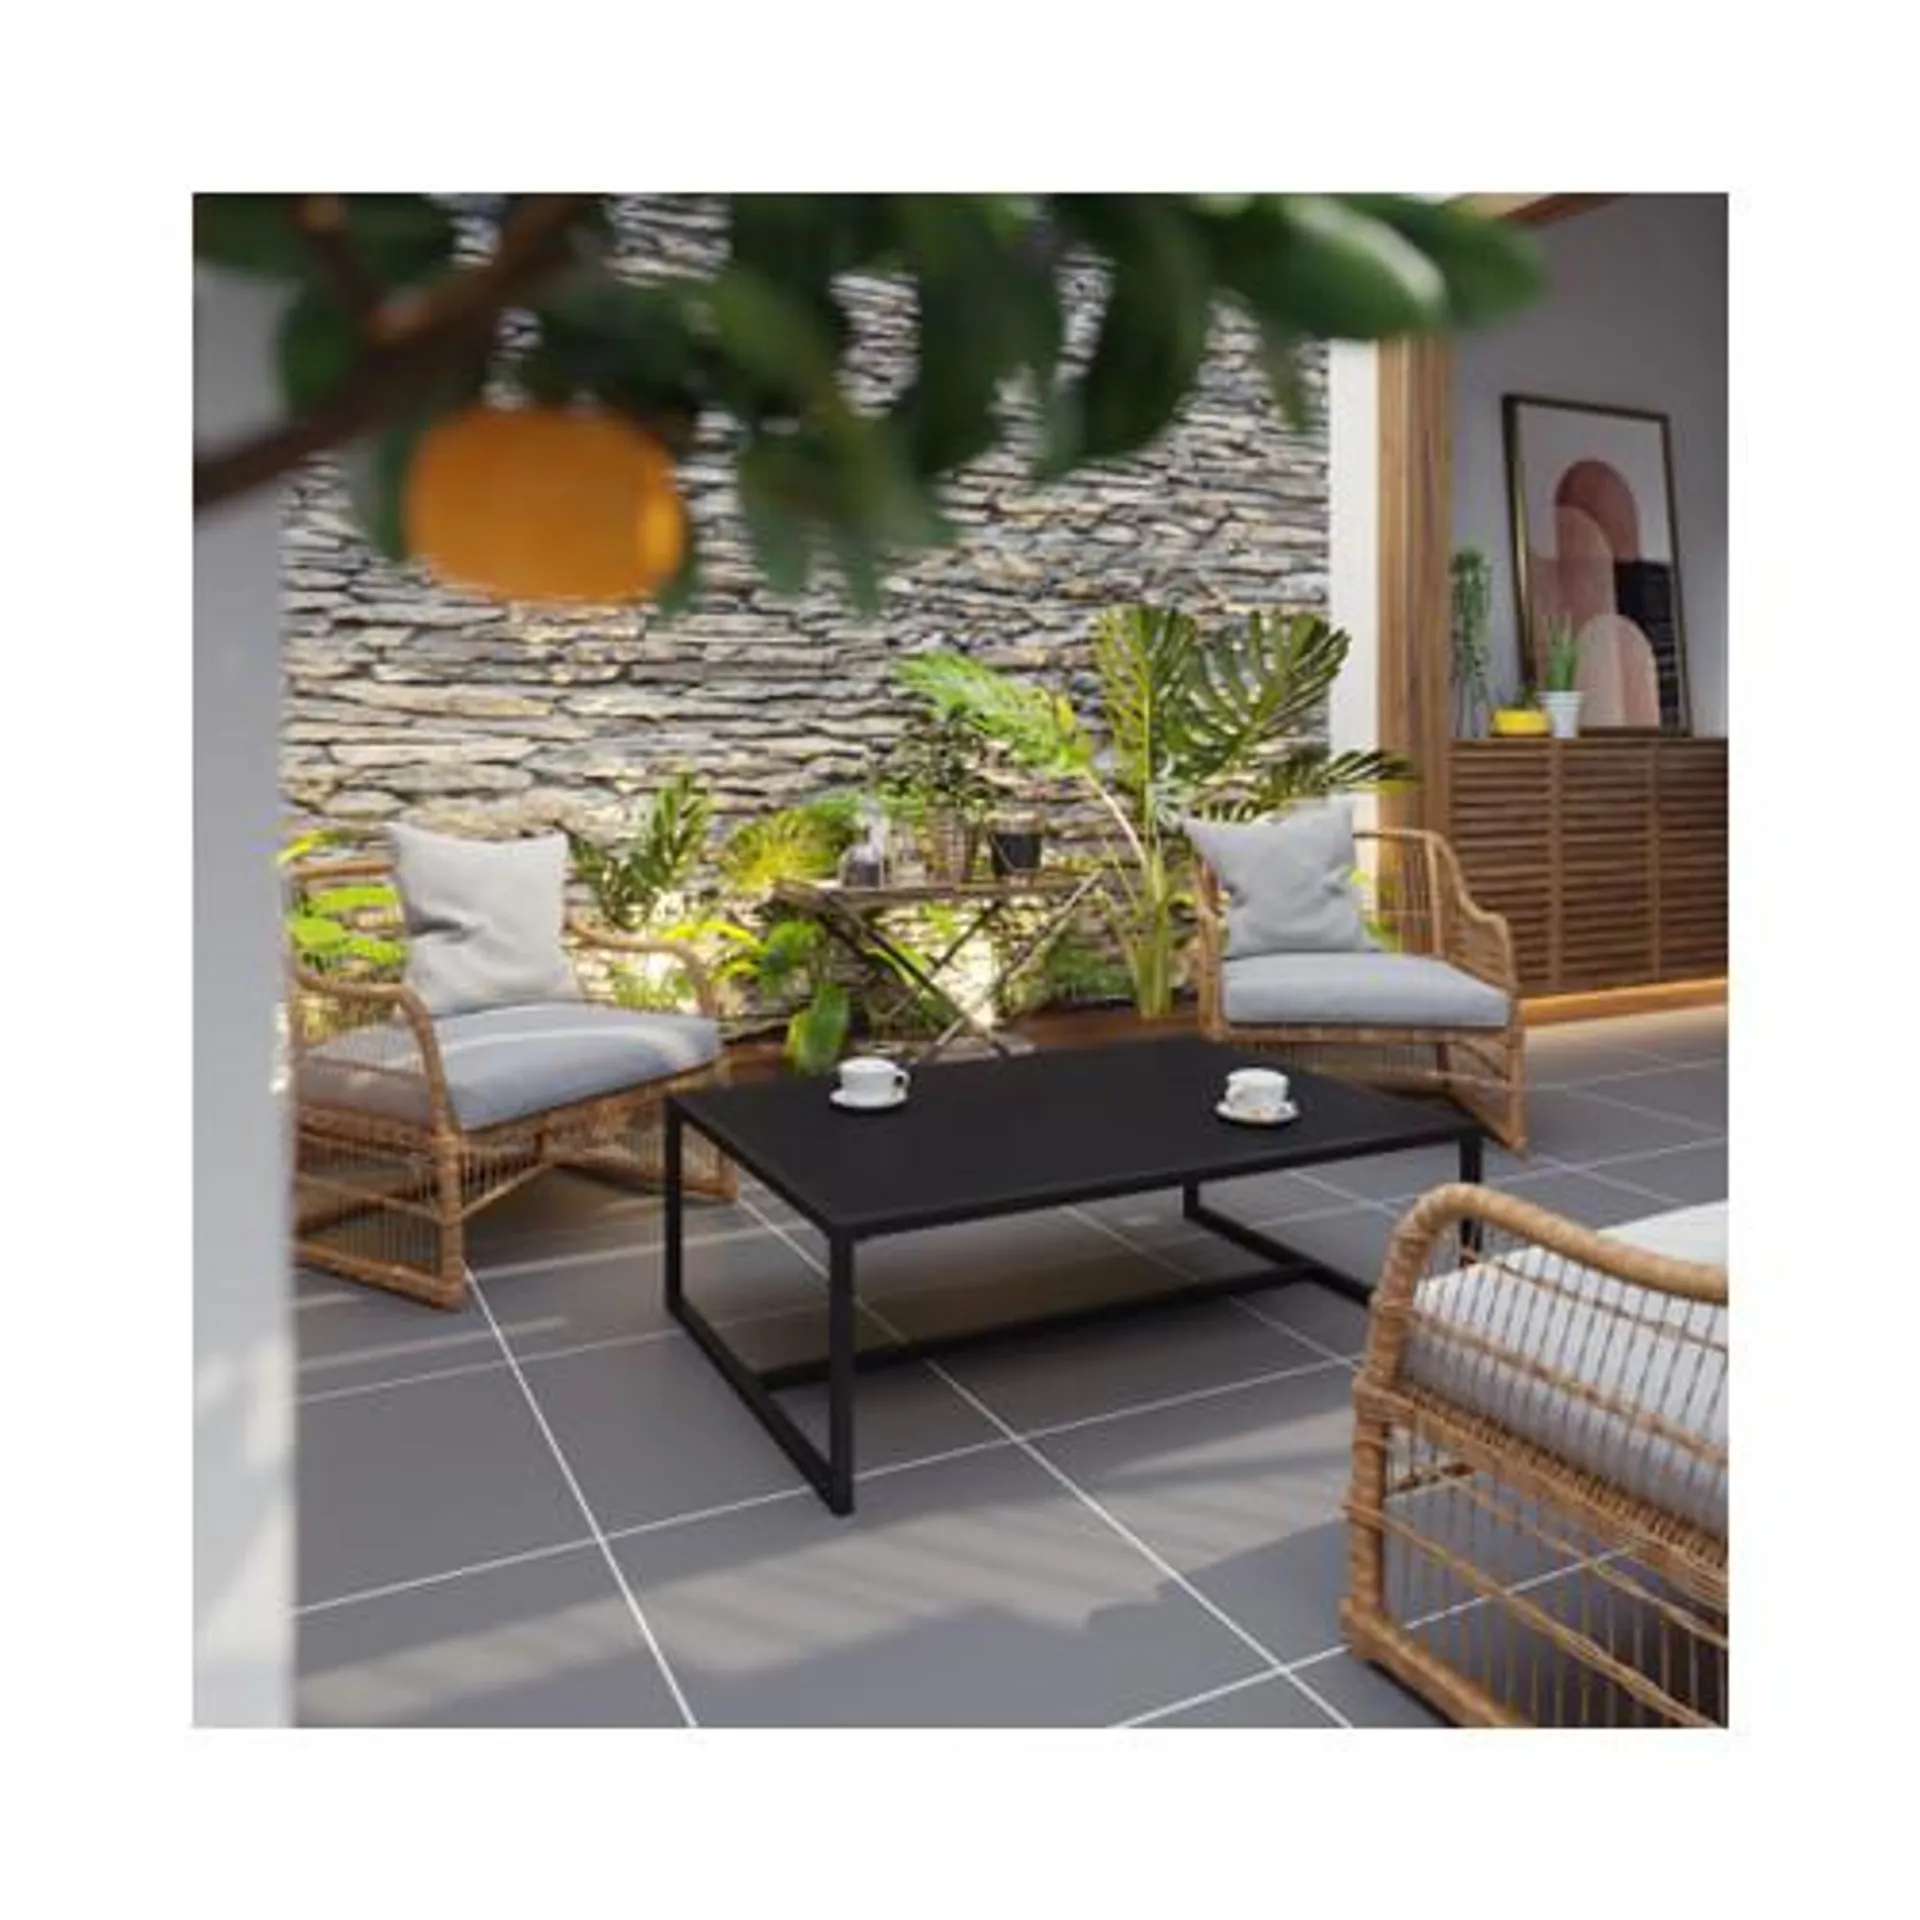 Outdoor Patio Coffee Table Commercial Grade Black Coffee Table for Deck Porch or Poolside Steel Square Leg Frame